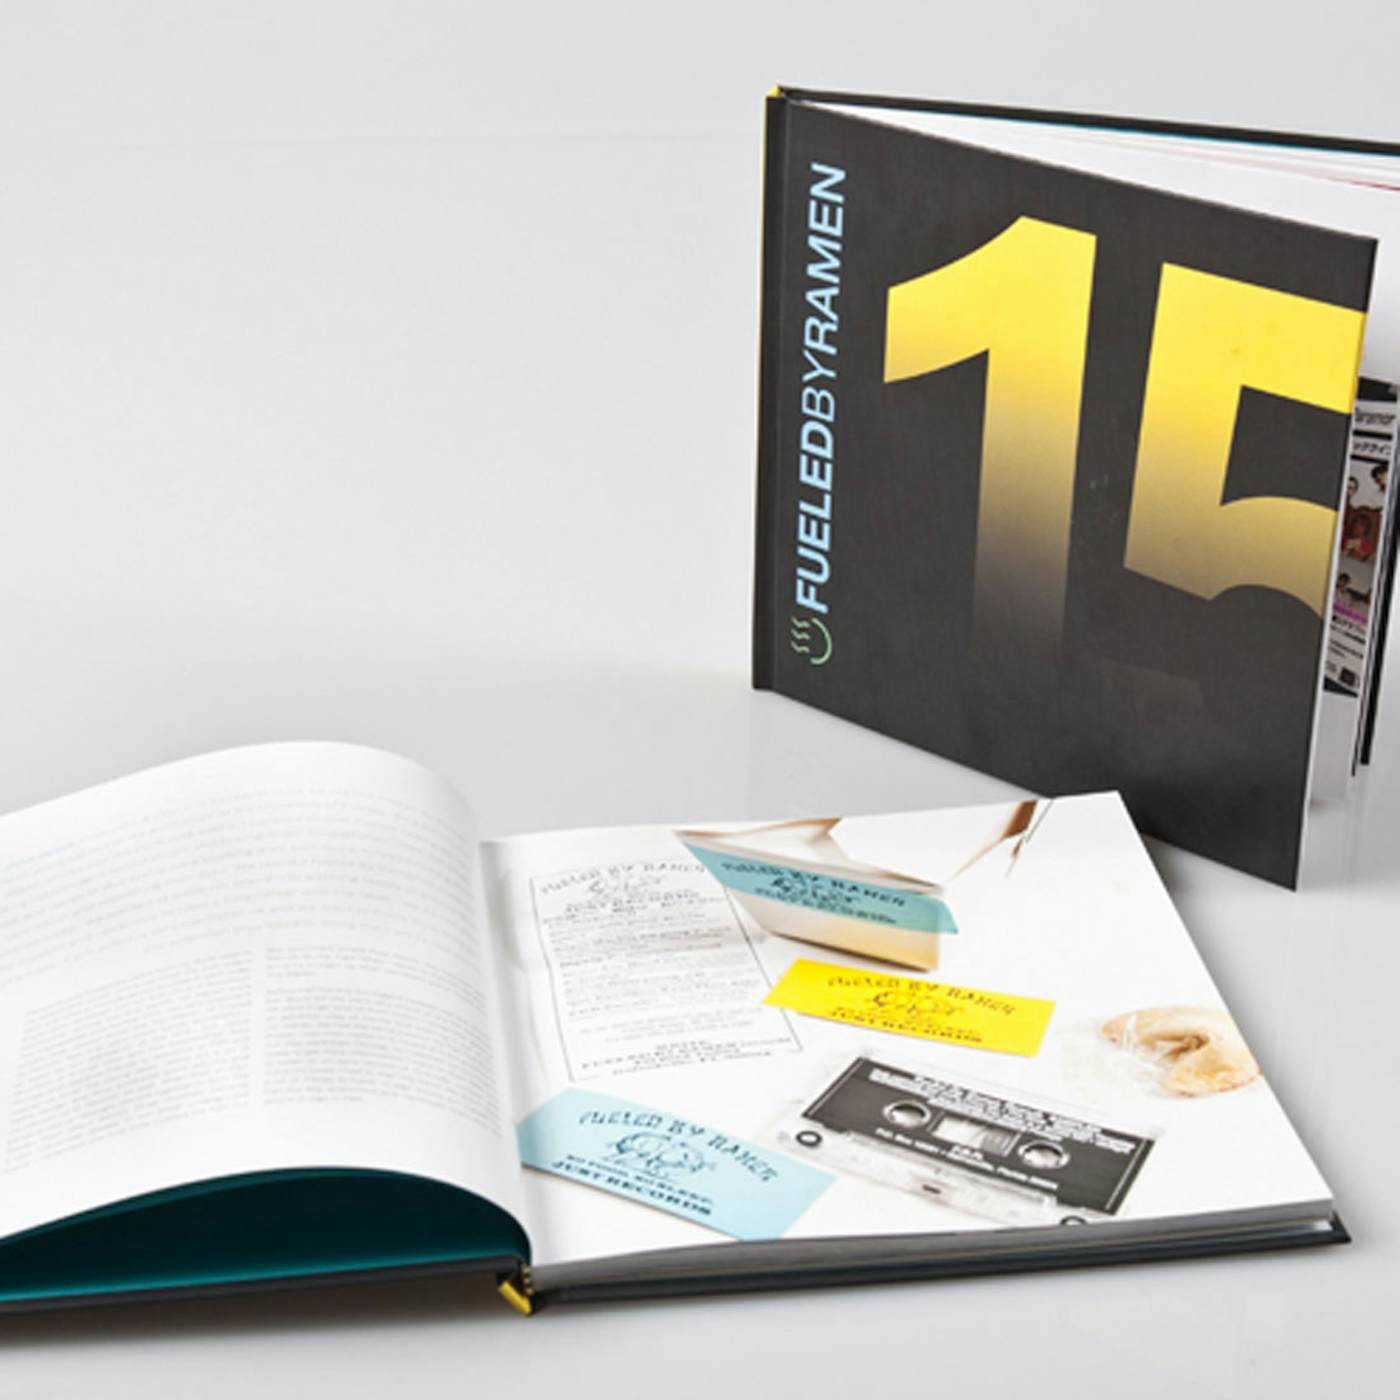 Fueled By Ramen 15th Anniversary Book + DVD